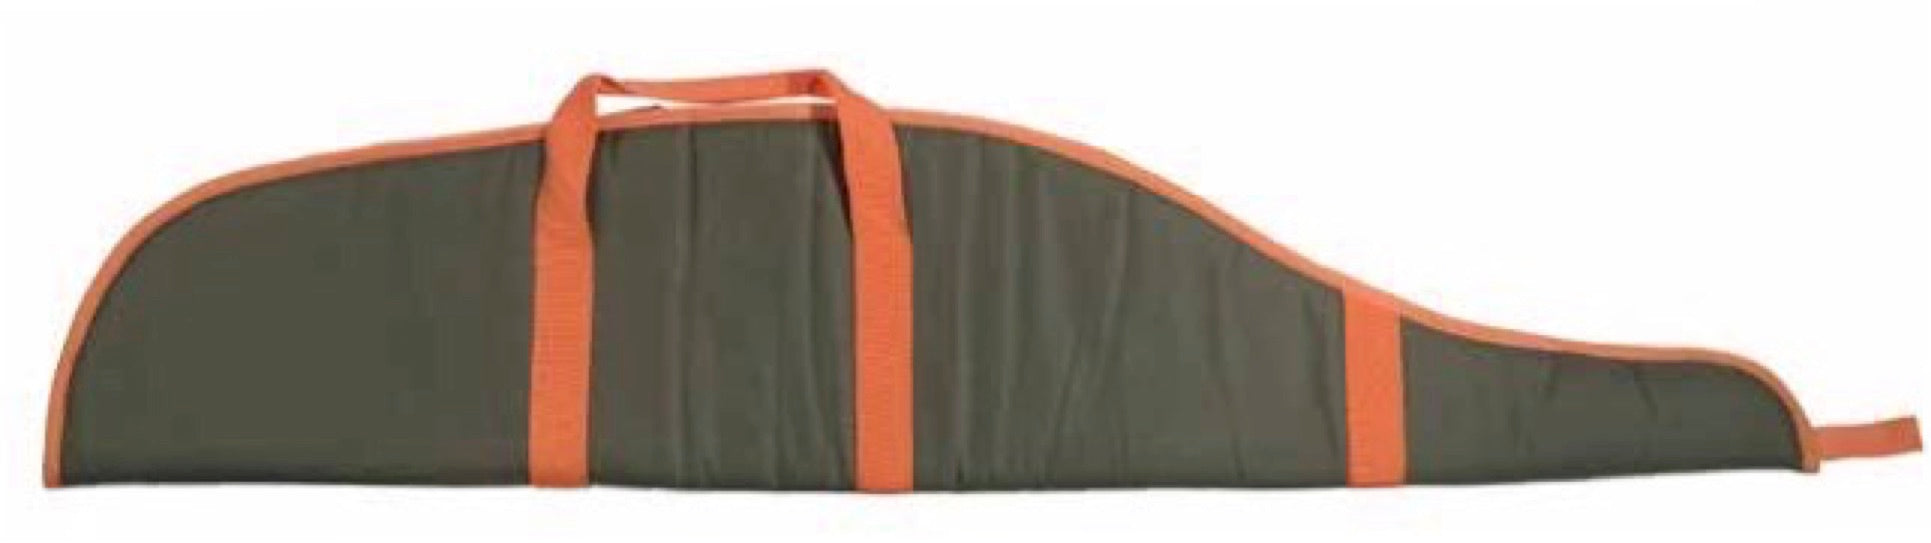 Padded Case for Rifle or Carbine with Scope